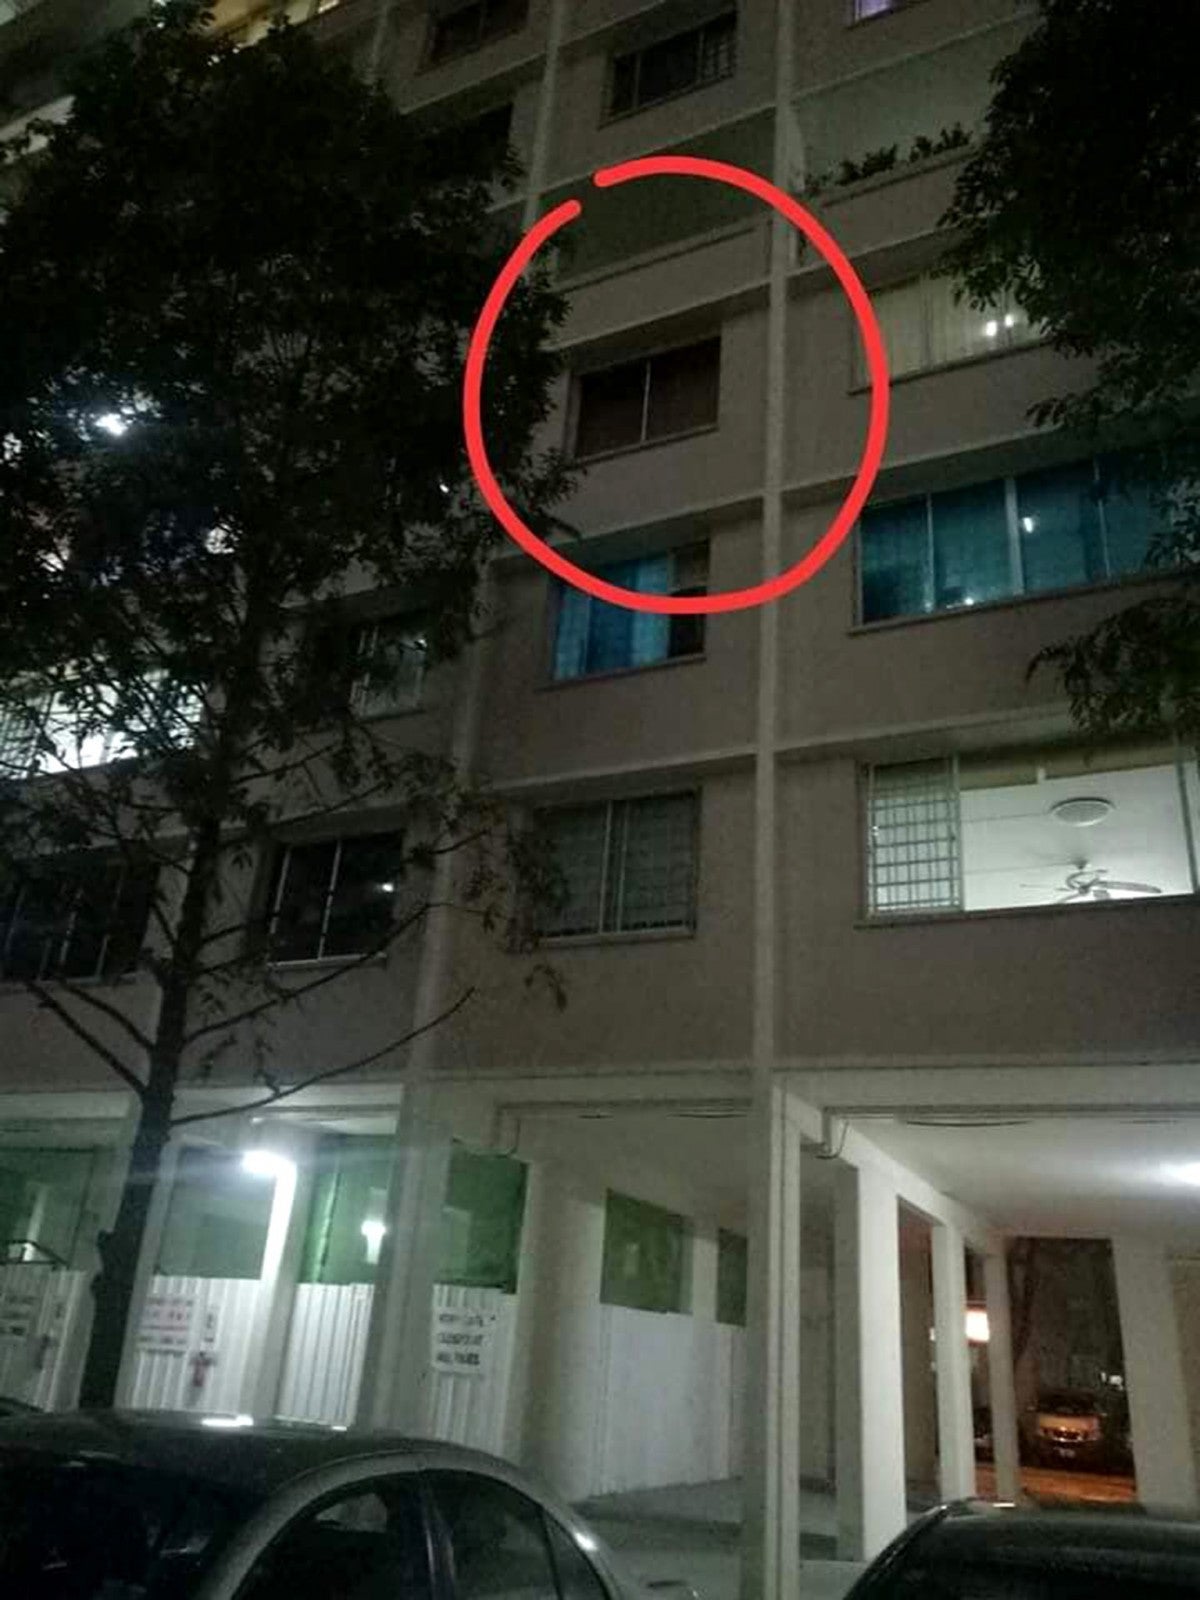 4yo Hospitalised in Malaysia After Miraculously Surviving Fall From 4-Storey Flat - WORLD OF BUZZ 2